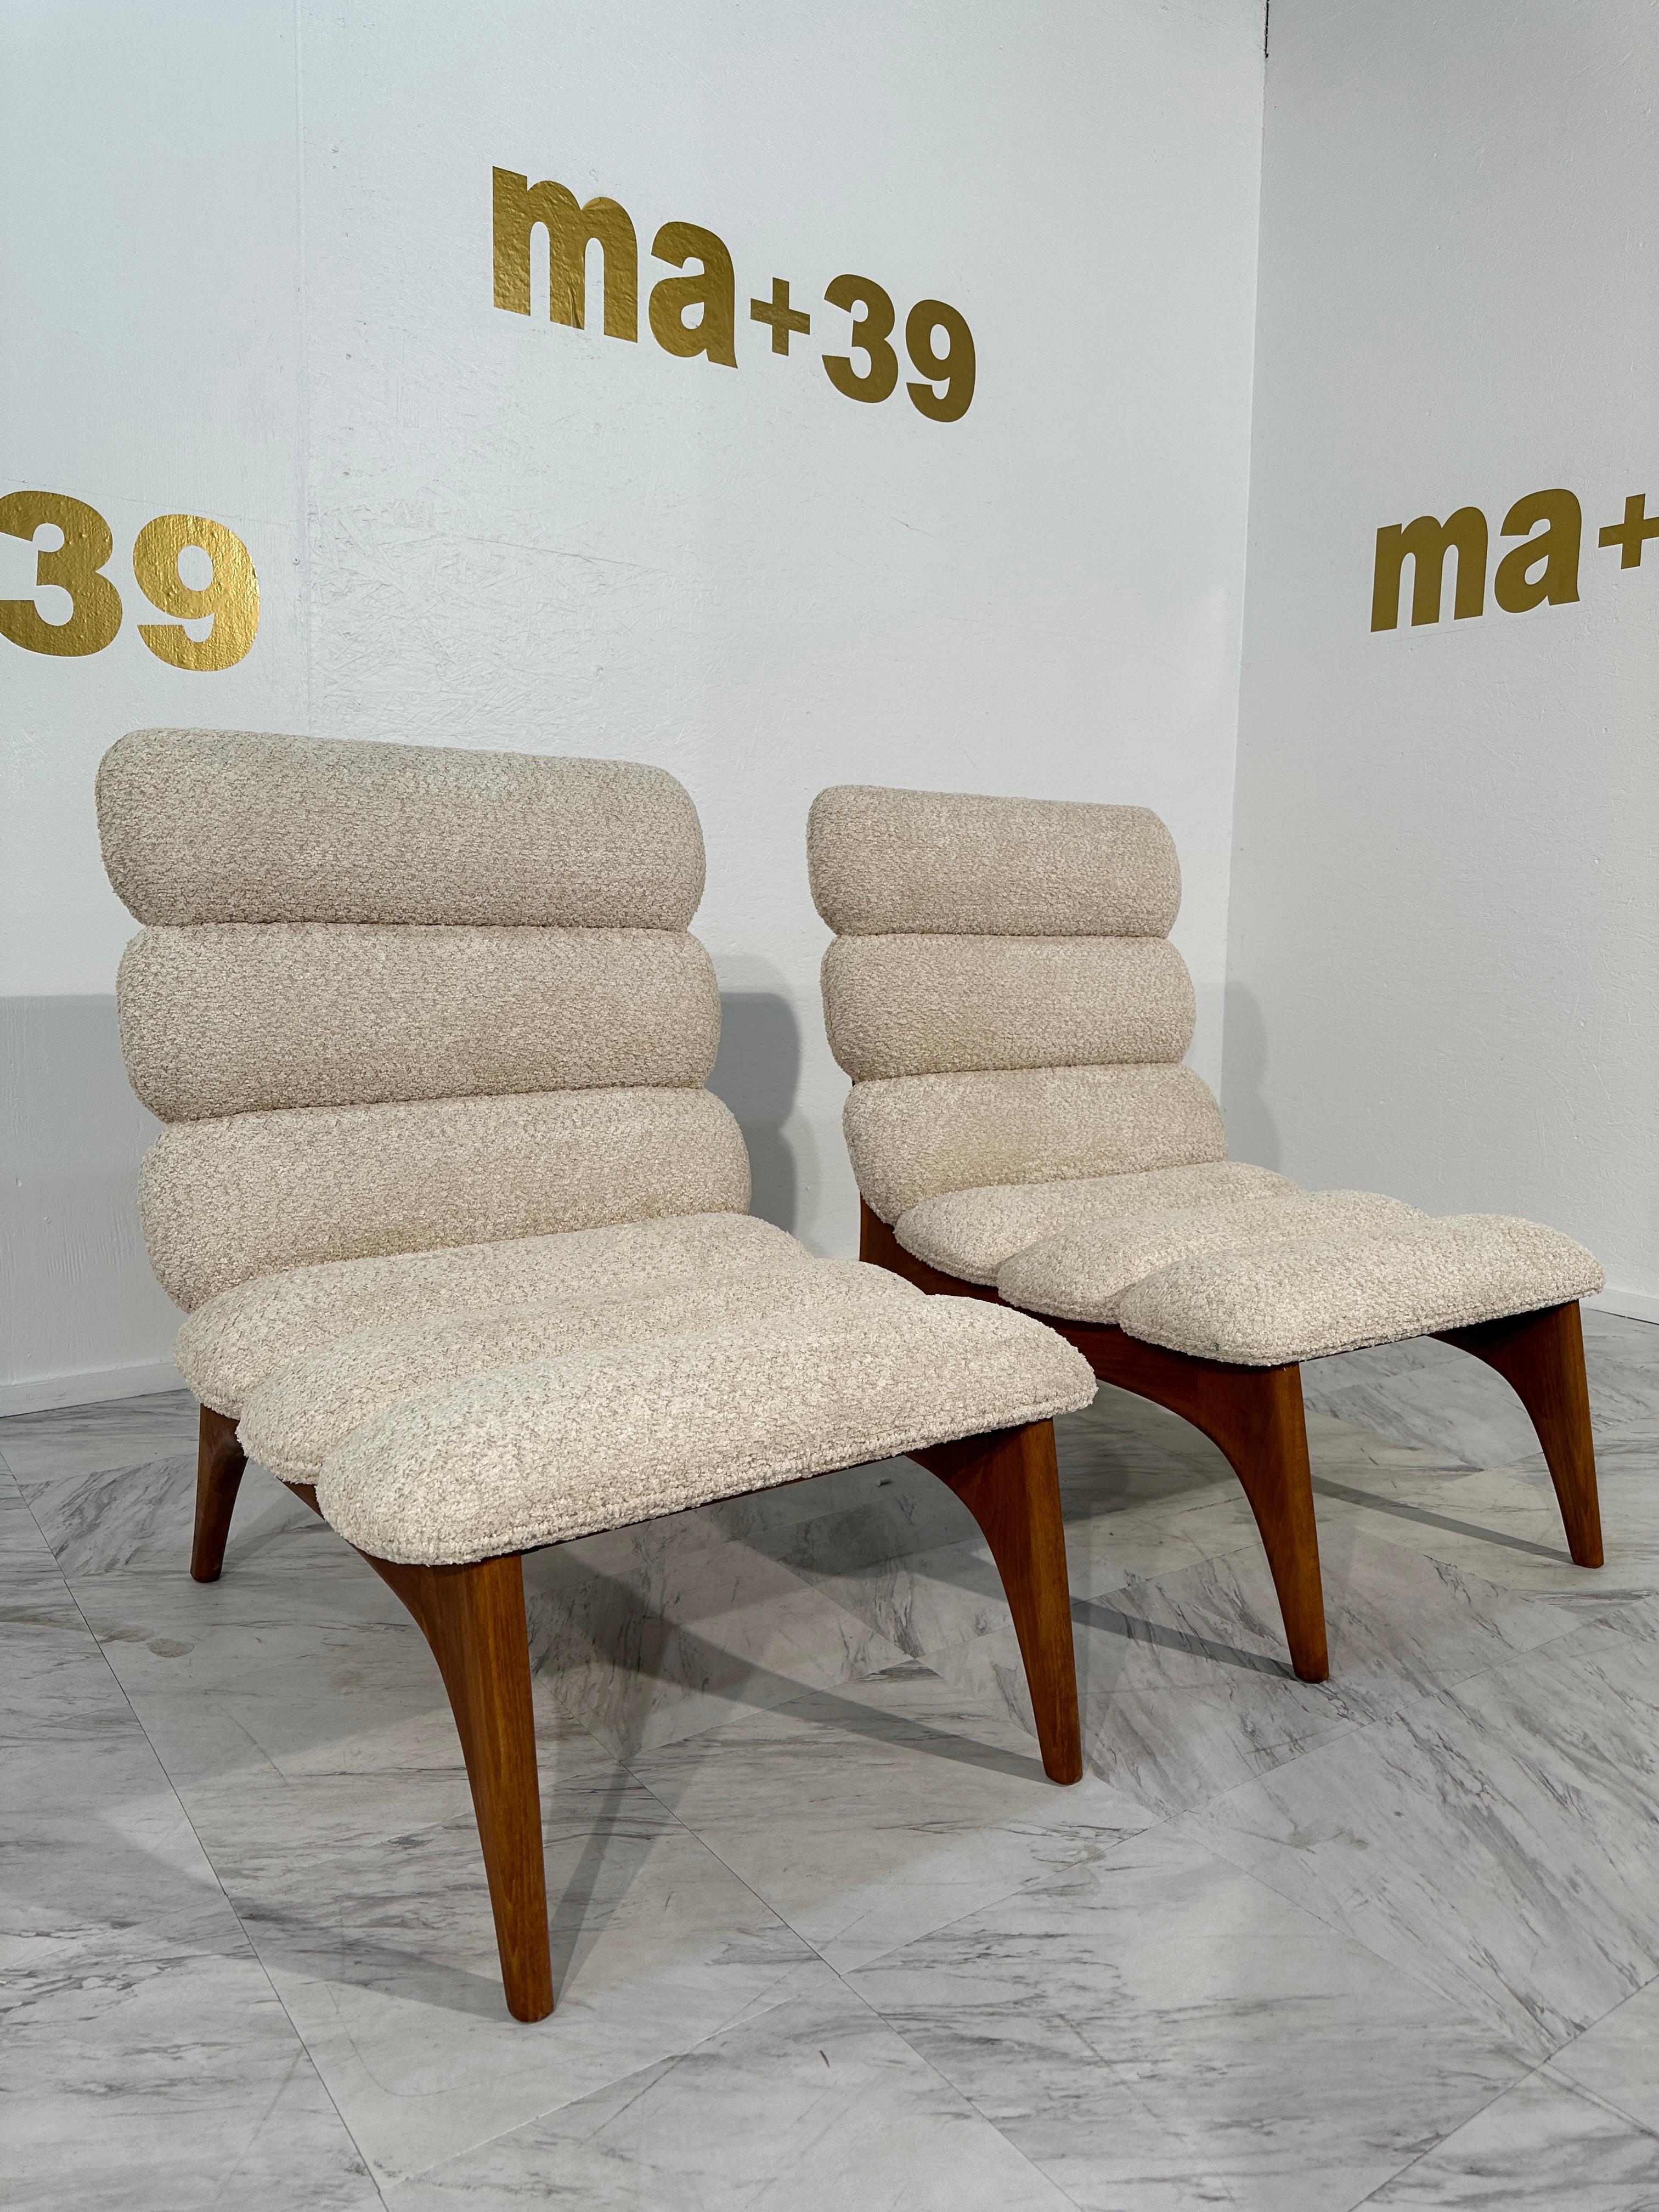 Pair of Mid-Century Modern Danish Lounge Chairs in Boucle Fabric 1980s For Sale 3